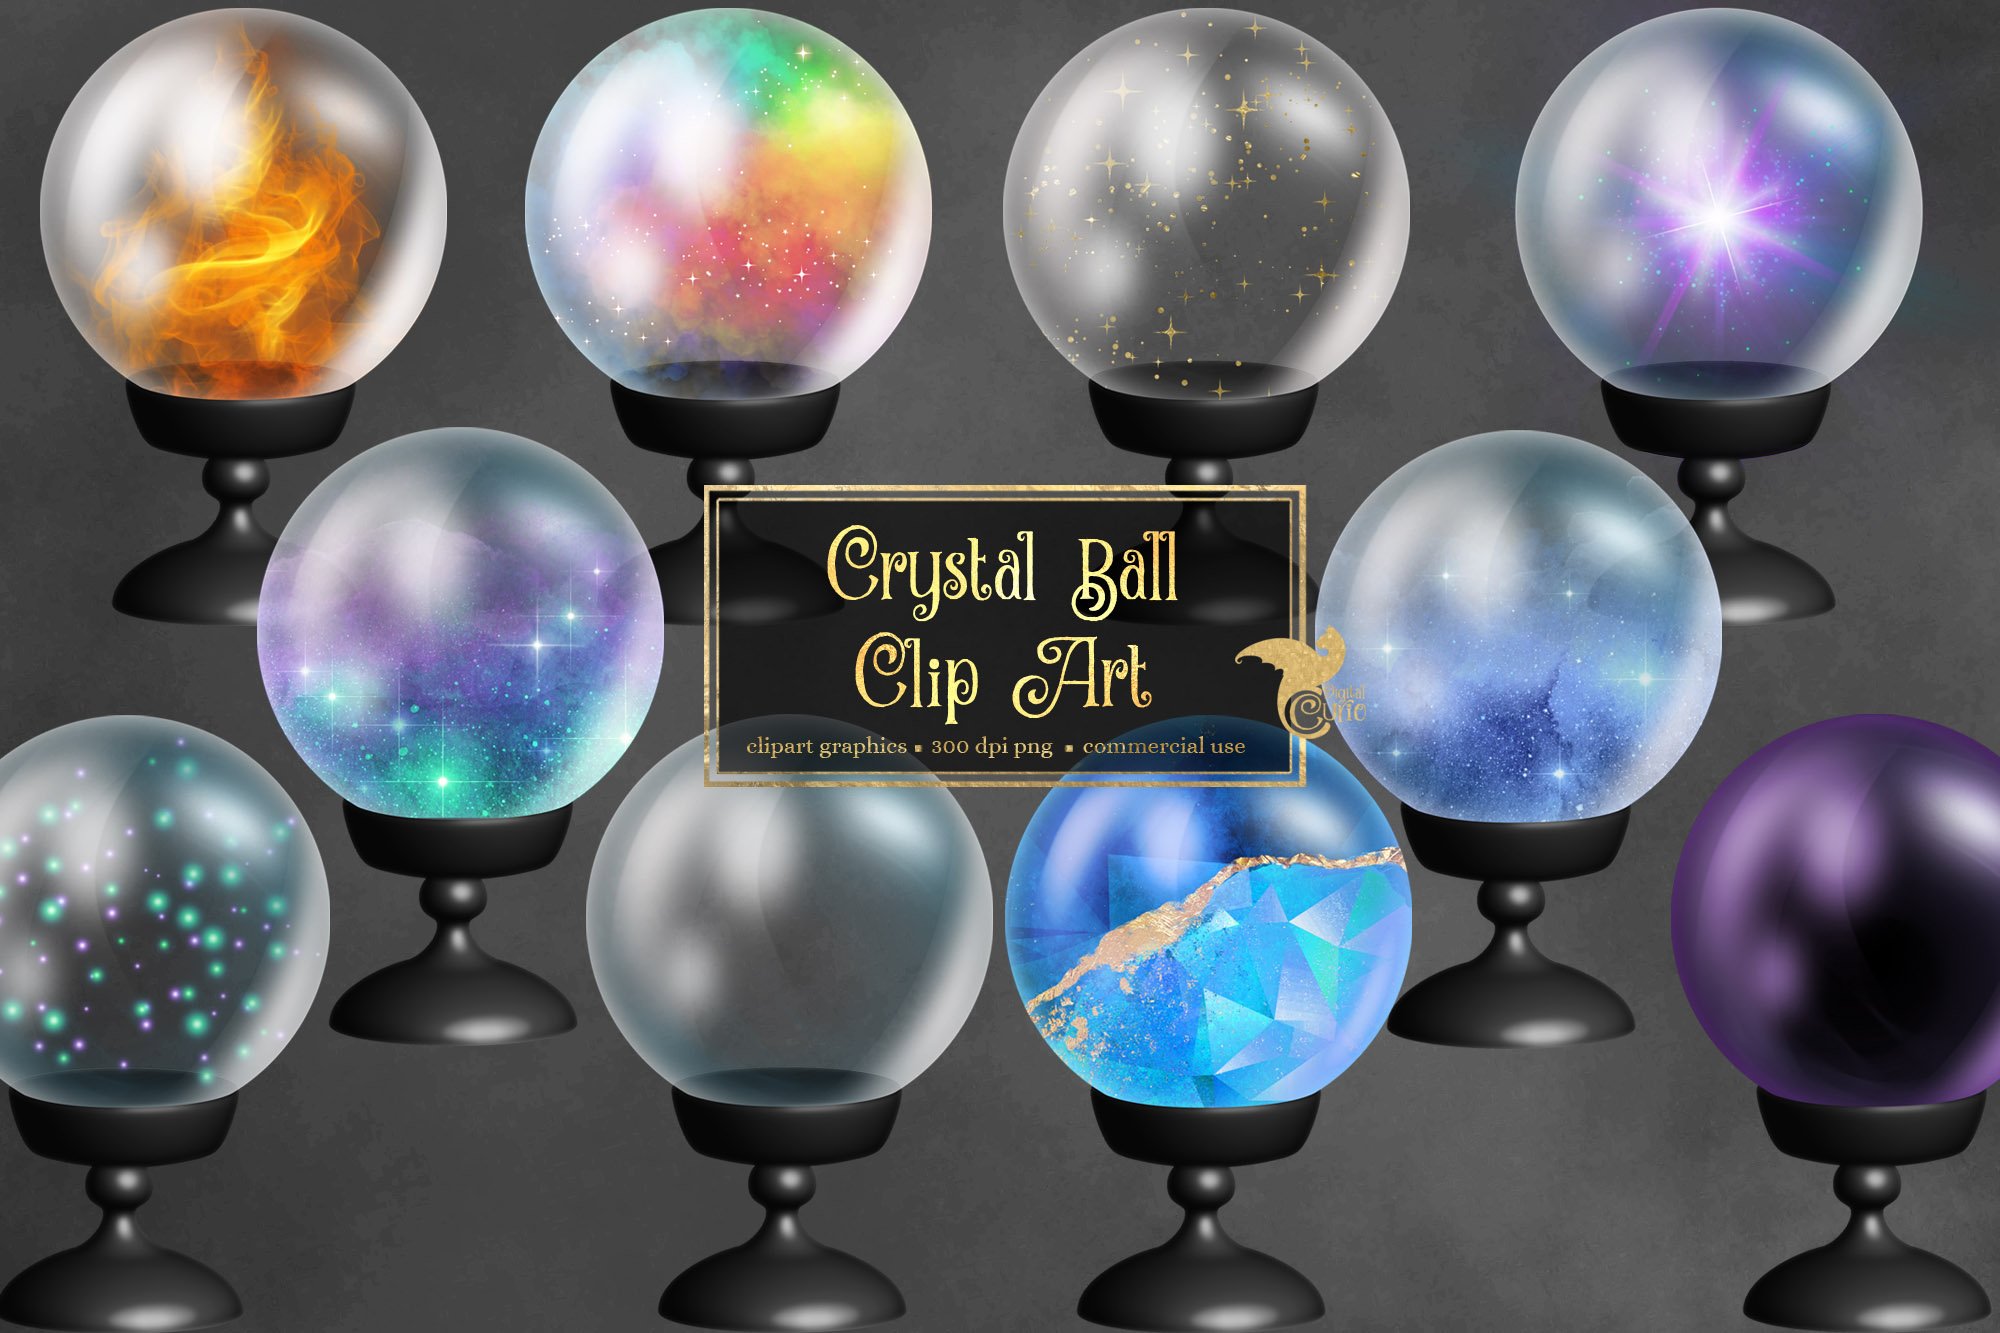 Crystal Ball Clipart cover image.